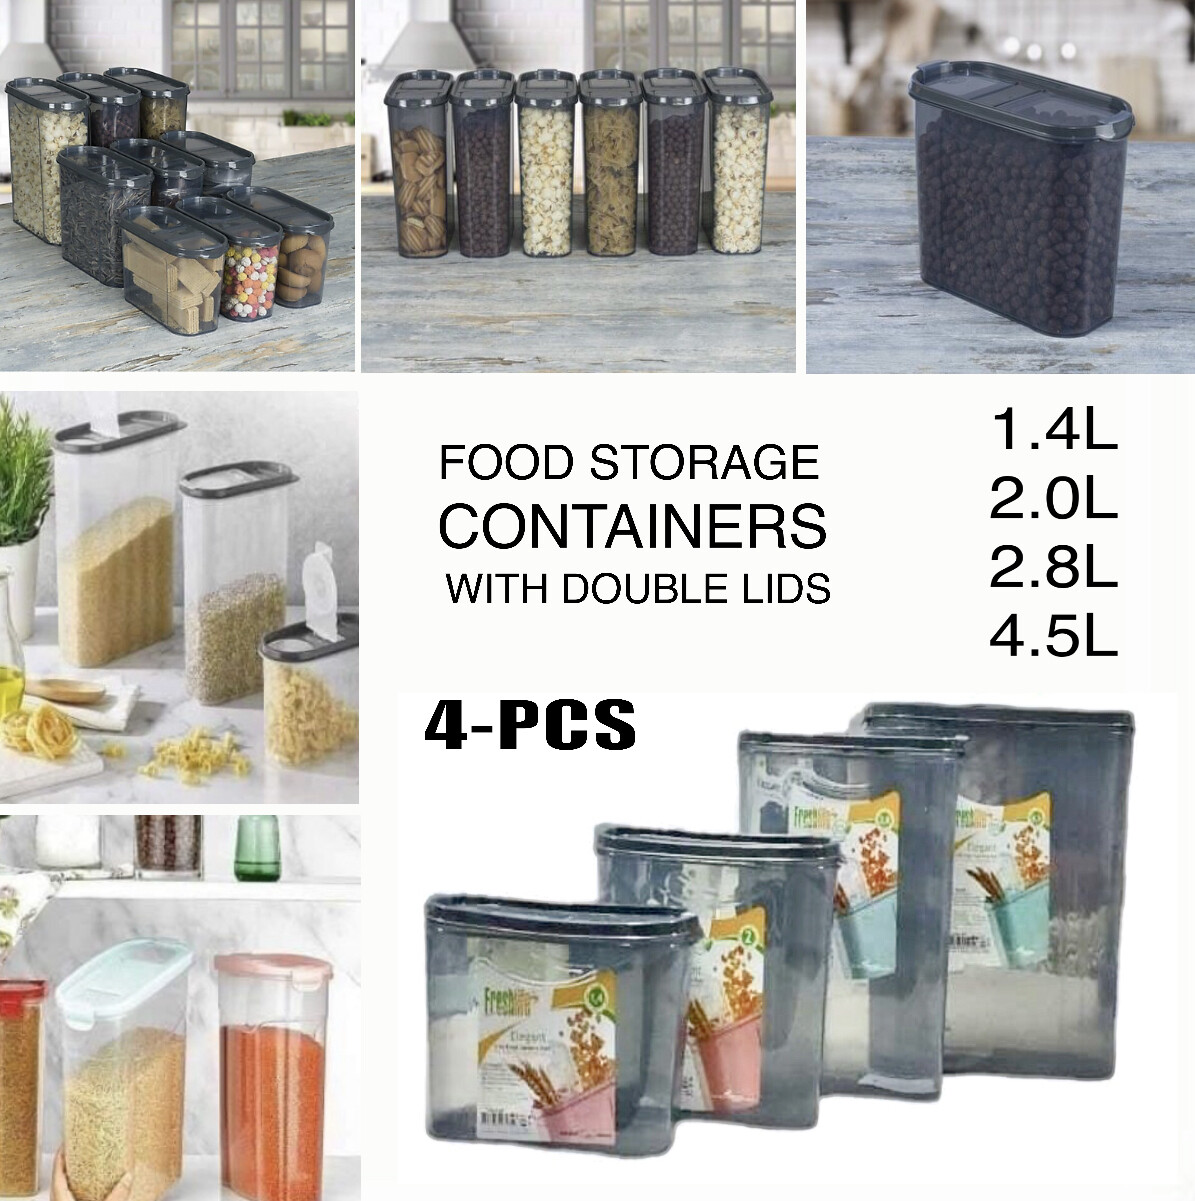 4-Pcs Food Containers